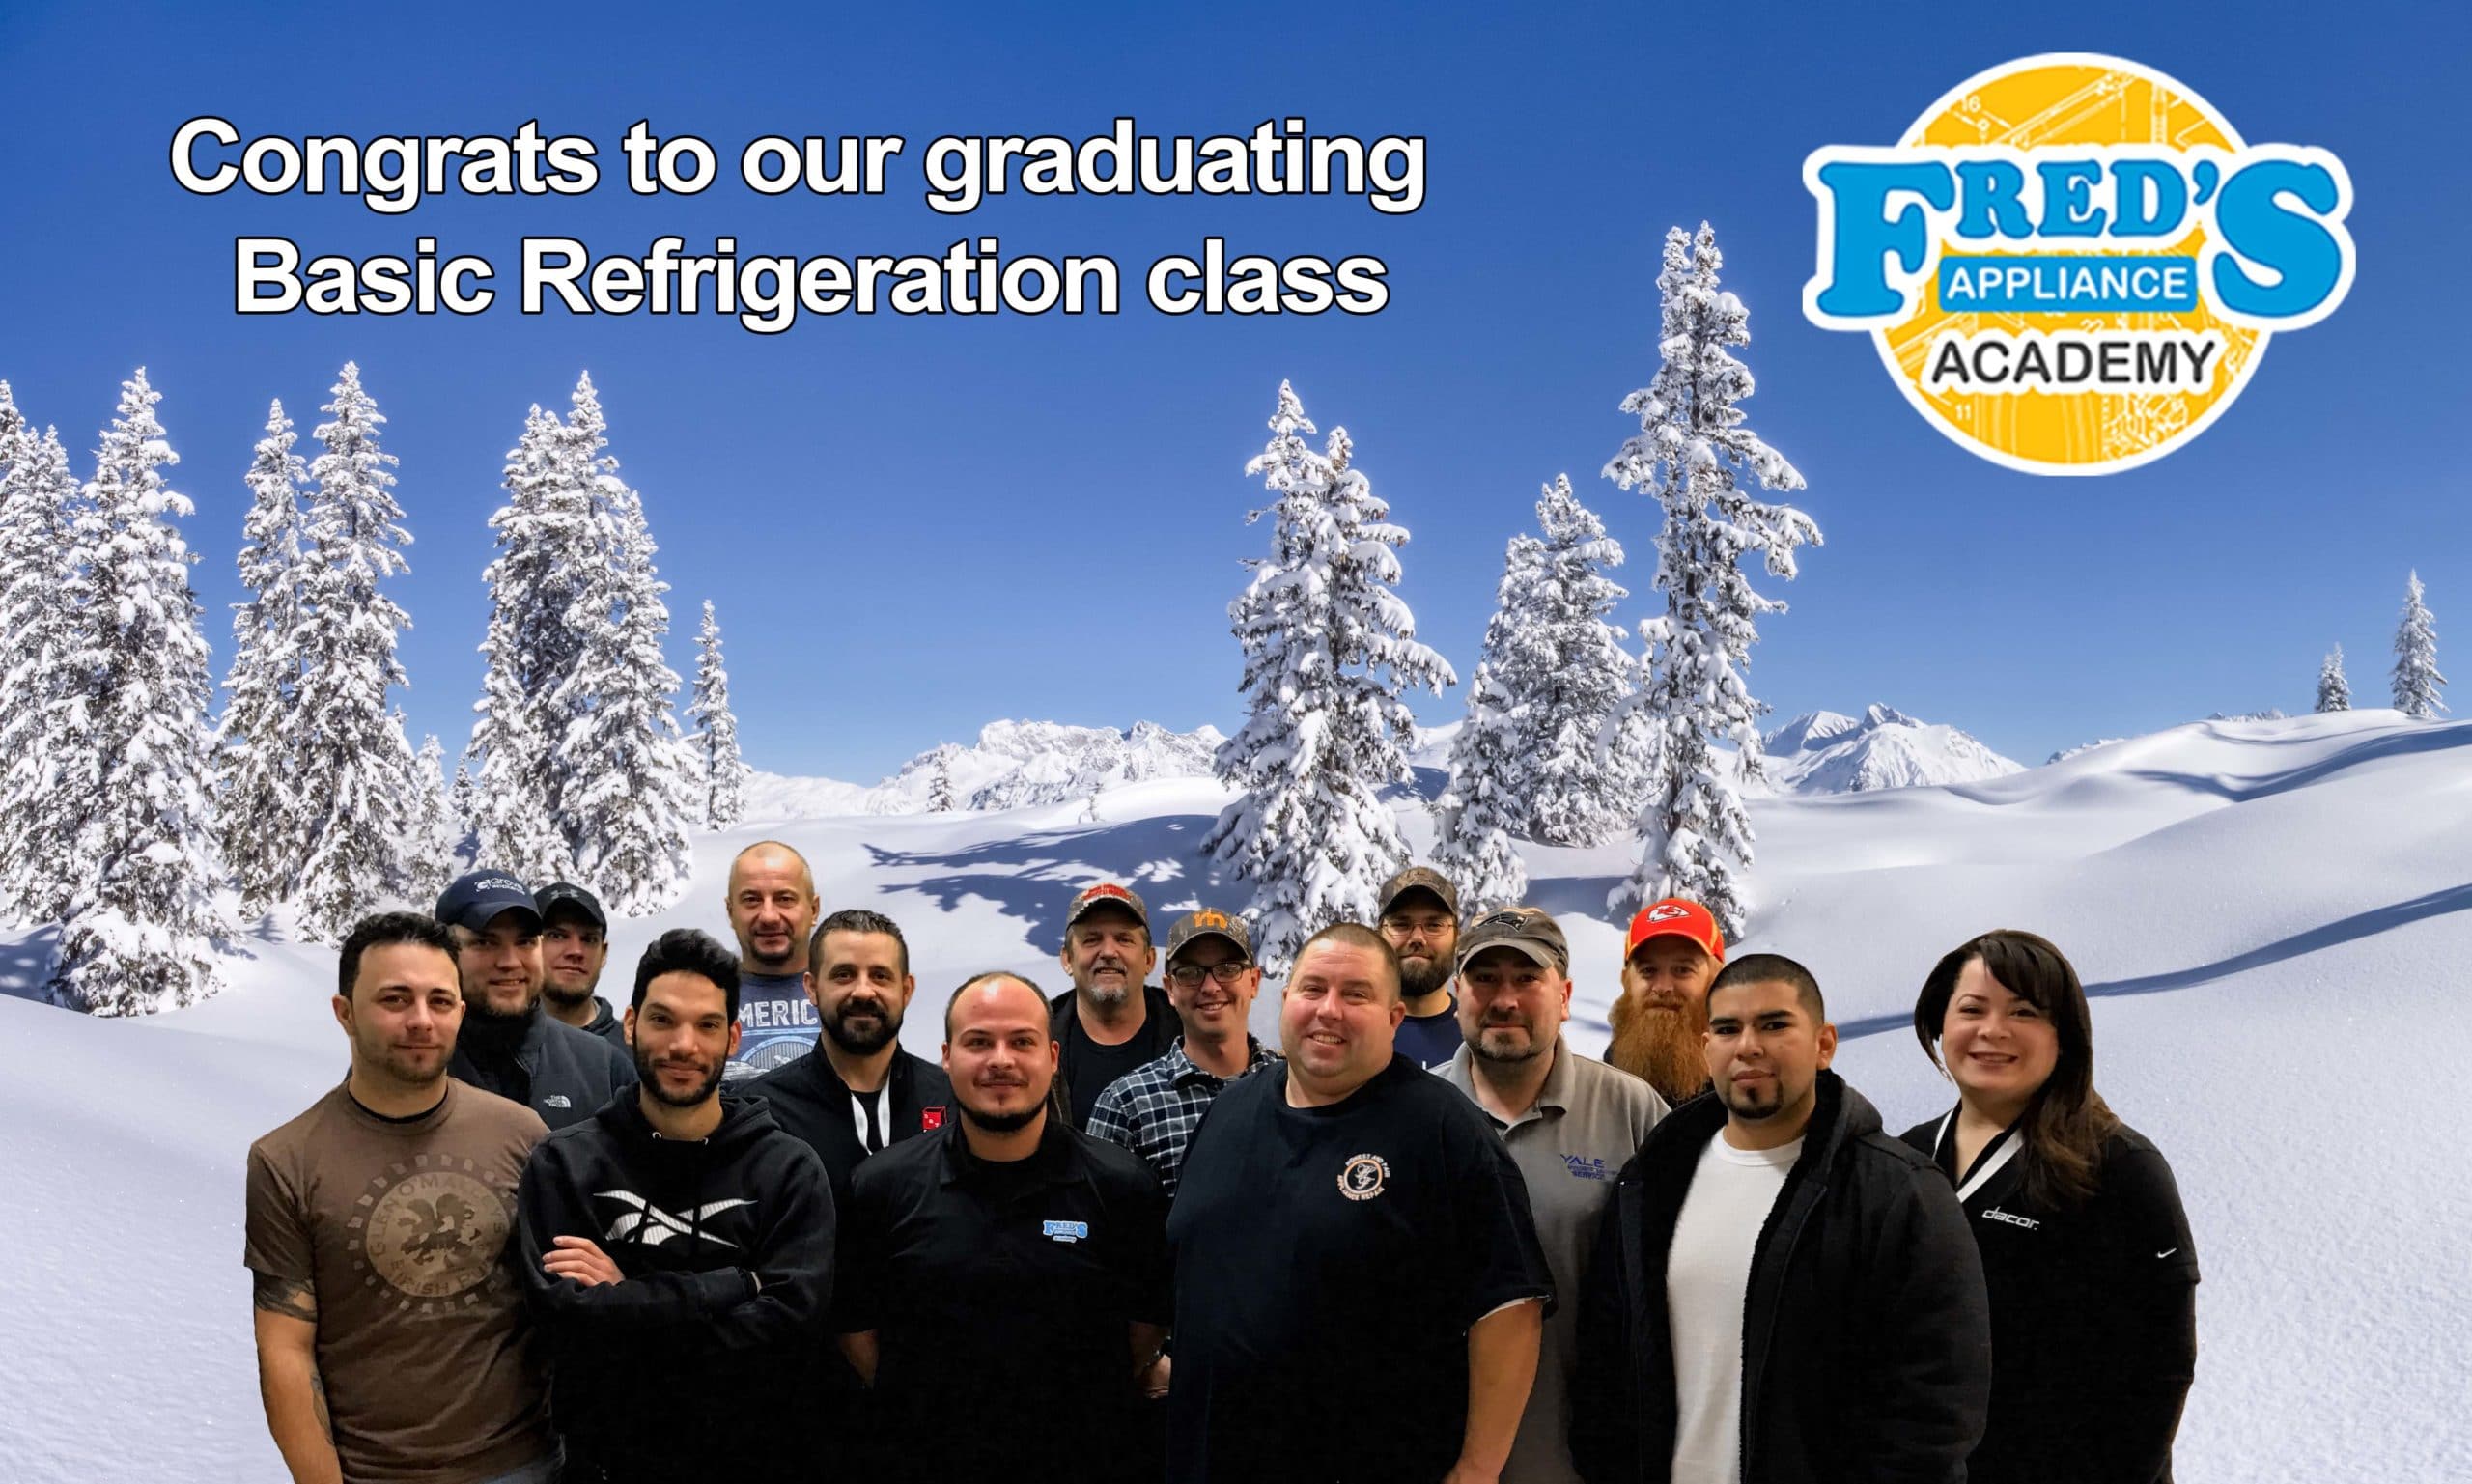 Featured image for “Congrats to our graduating Basic Refrigeration class”